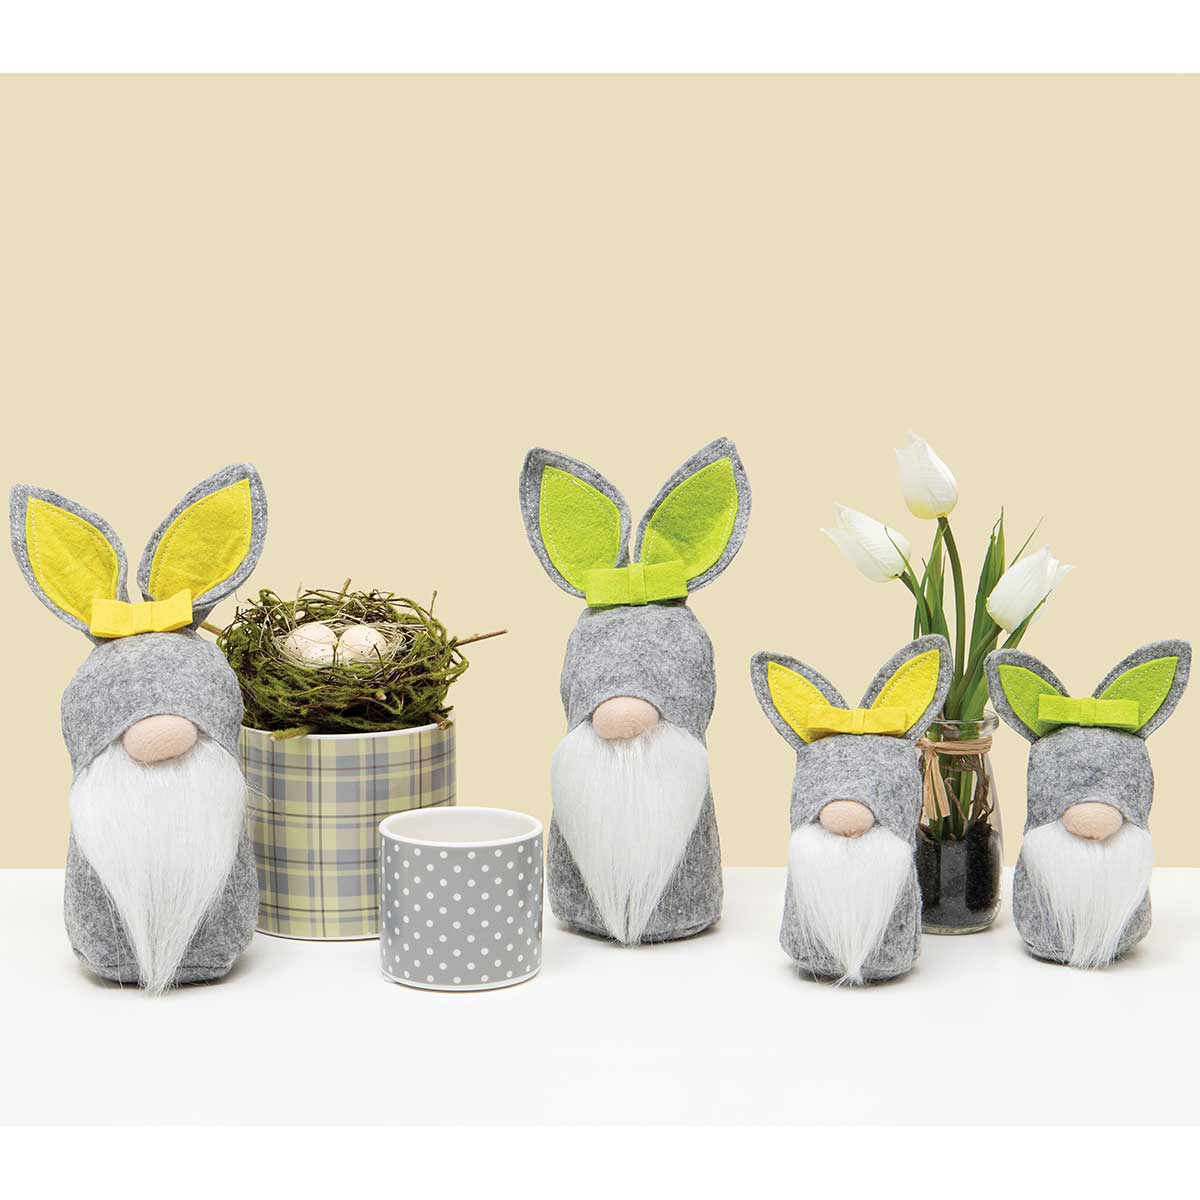 b50 GNOME BUNNY 2 ASSORTED 3.75IN X 3IN X 5.25IN